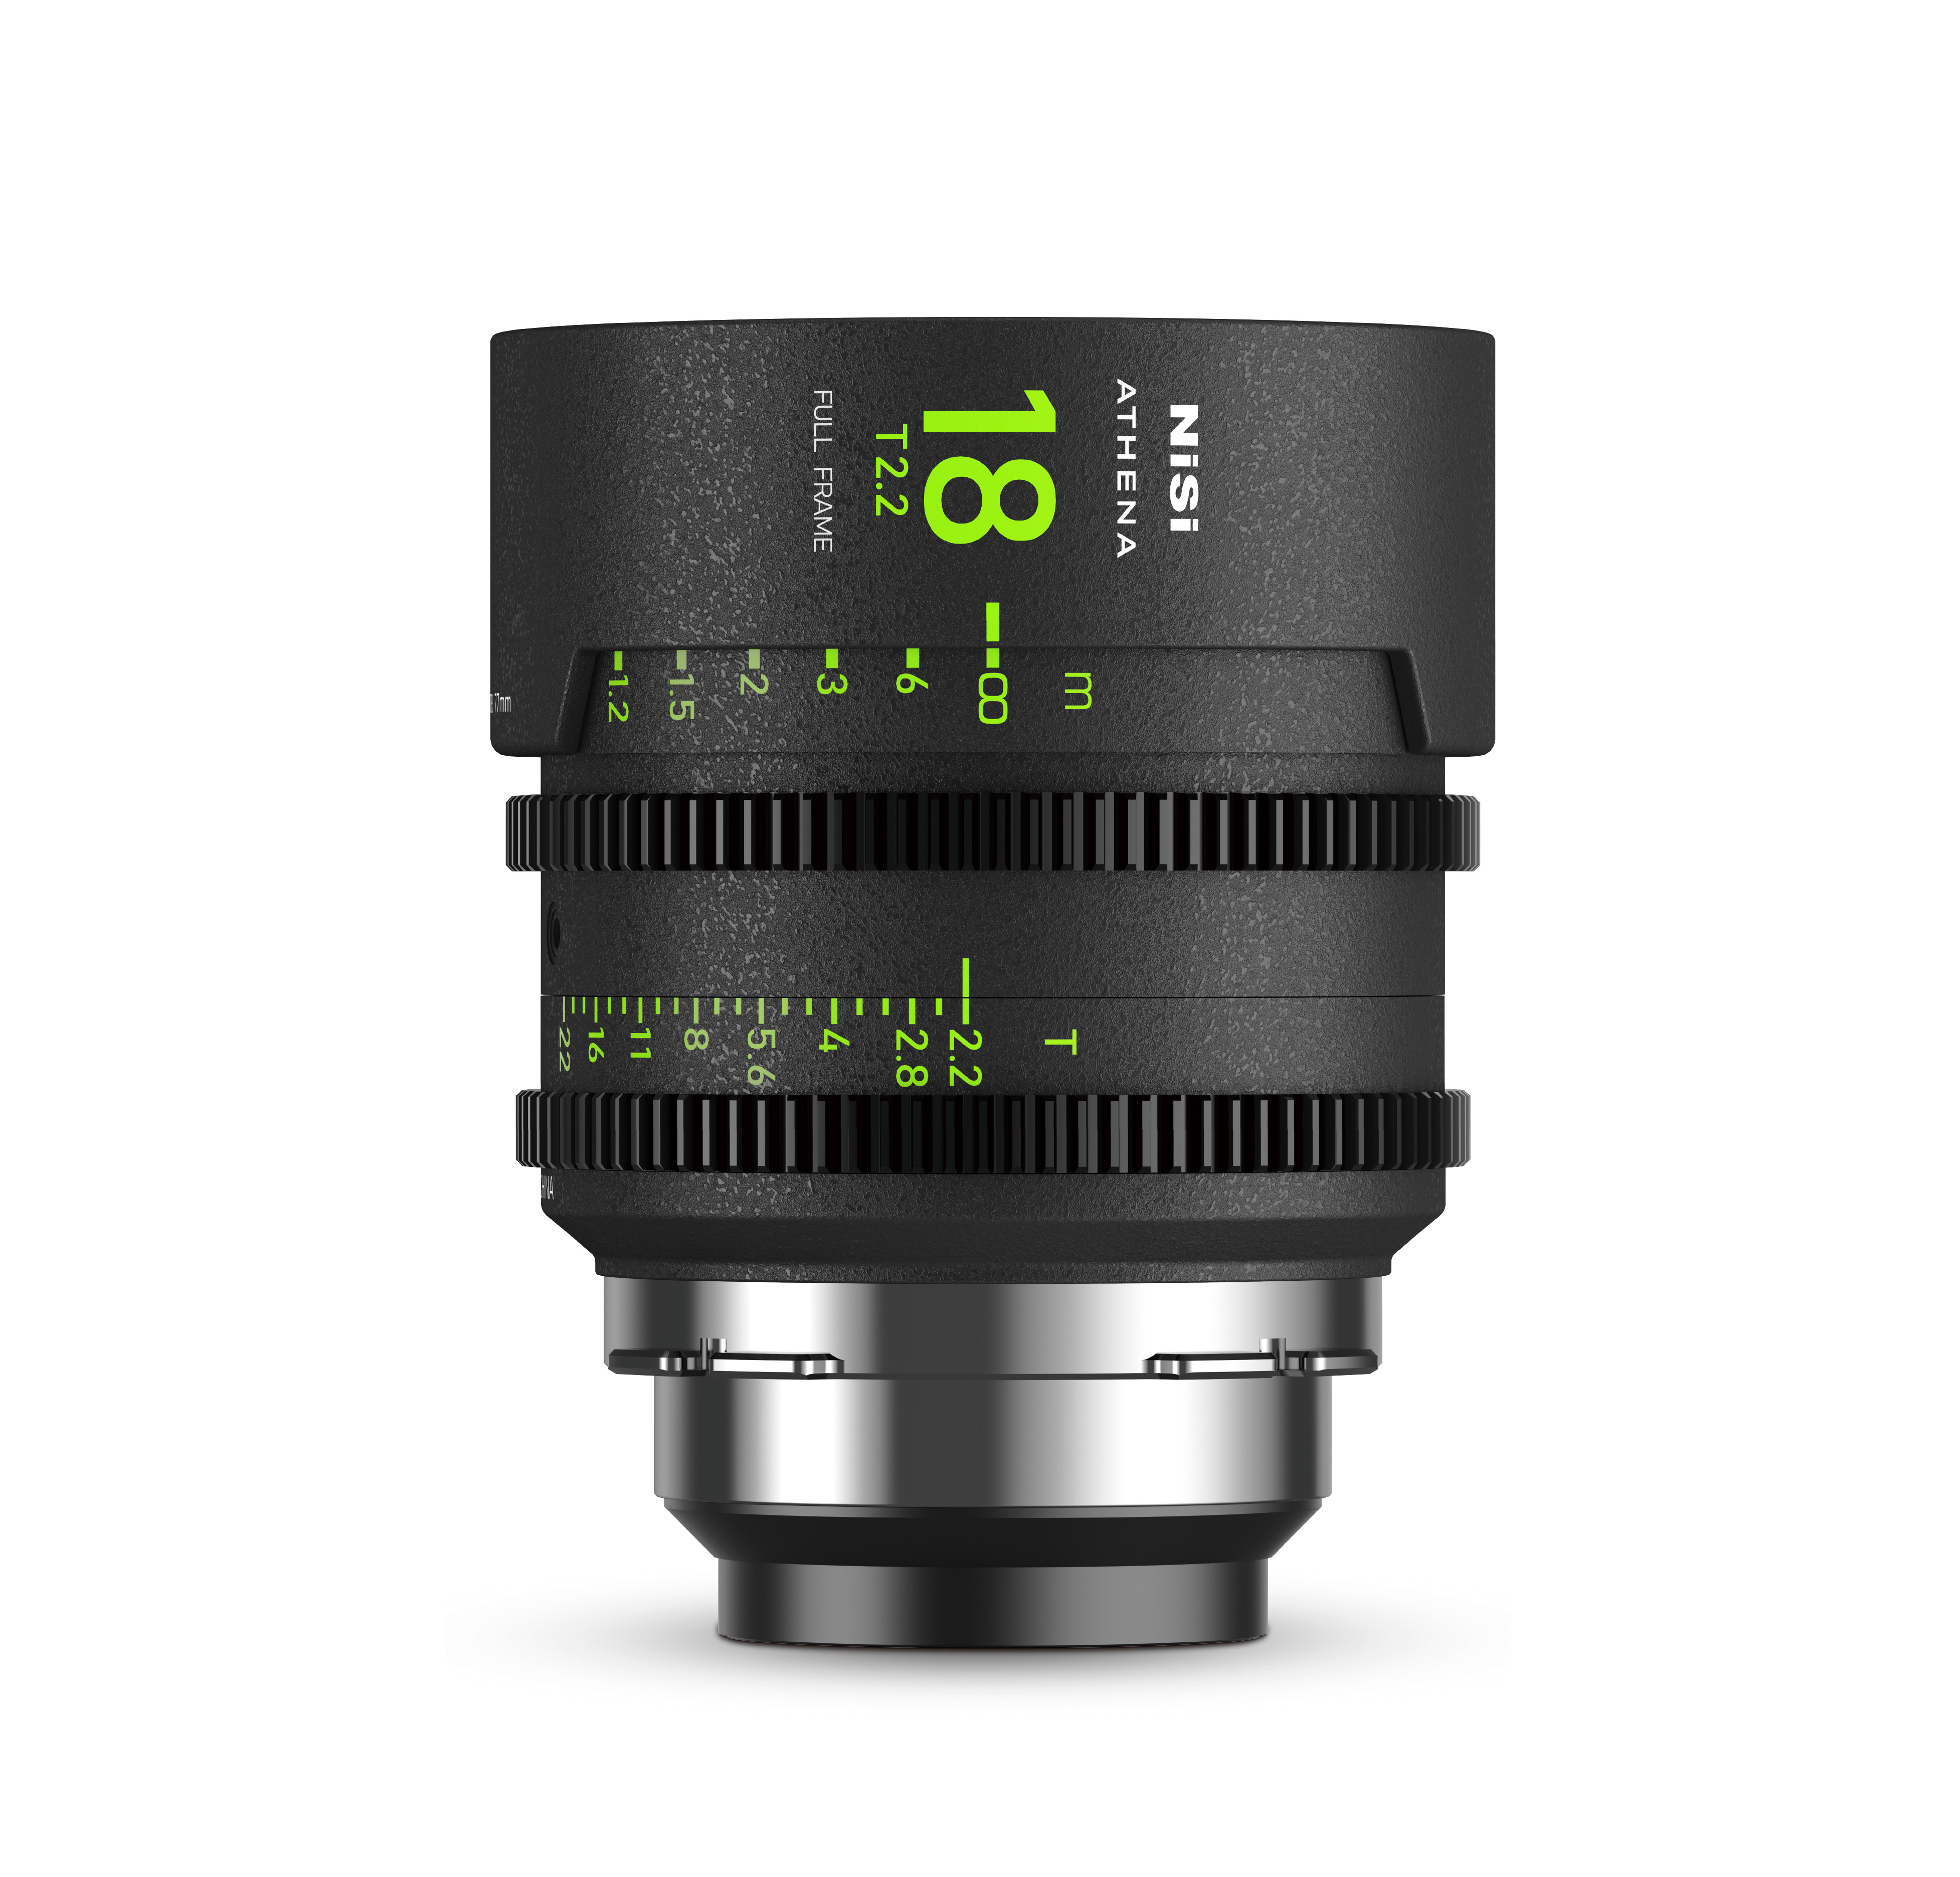 Athena Prime 18mm T2.2 (ohne Drop-In-Filter) – Sony E-Mount